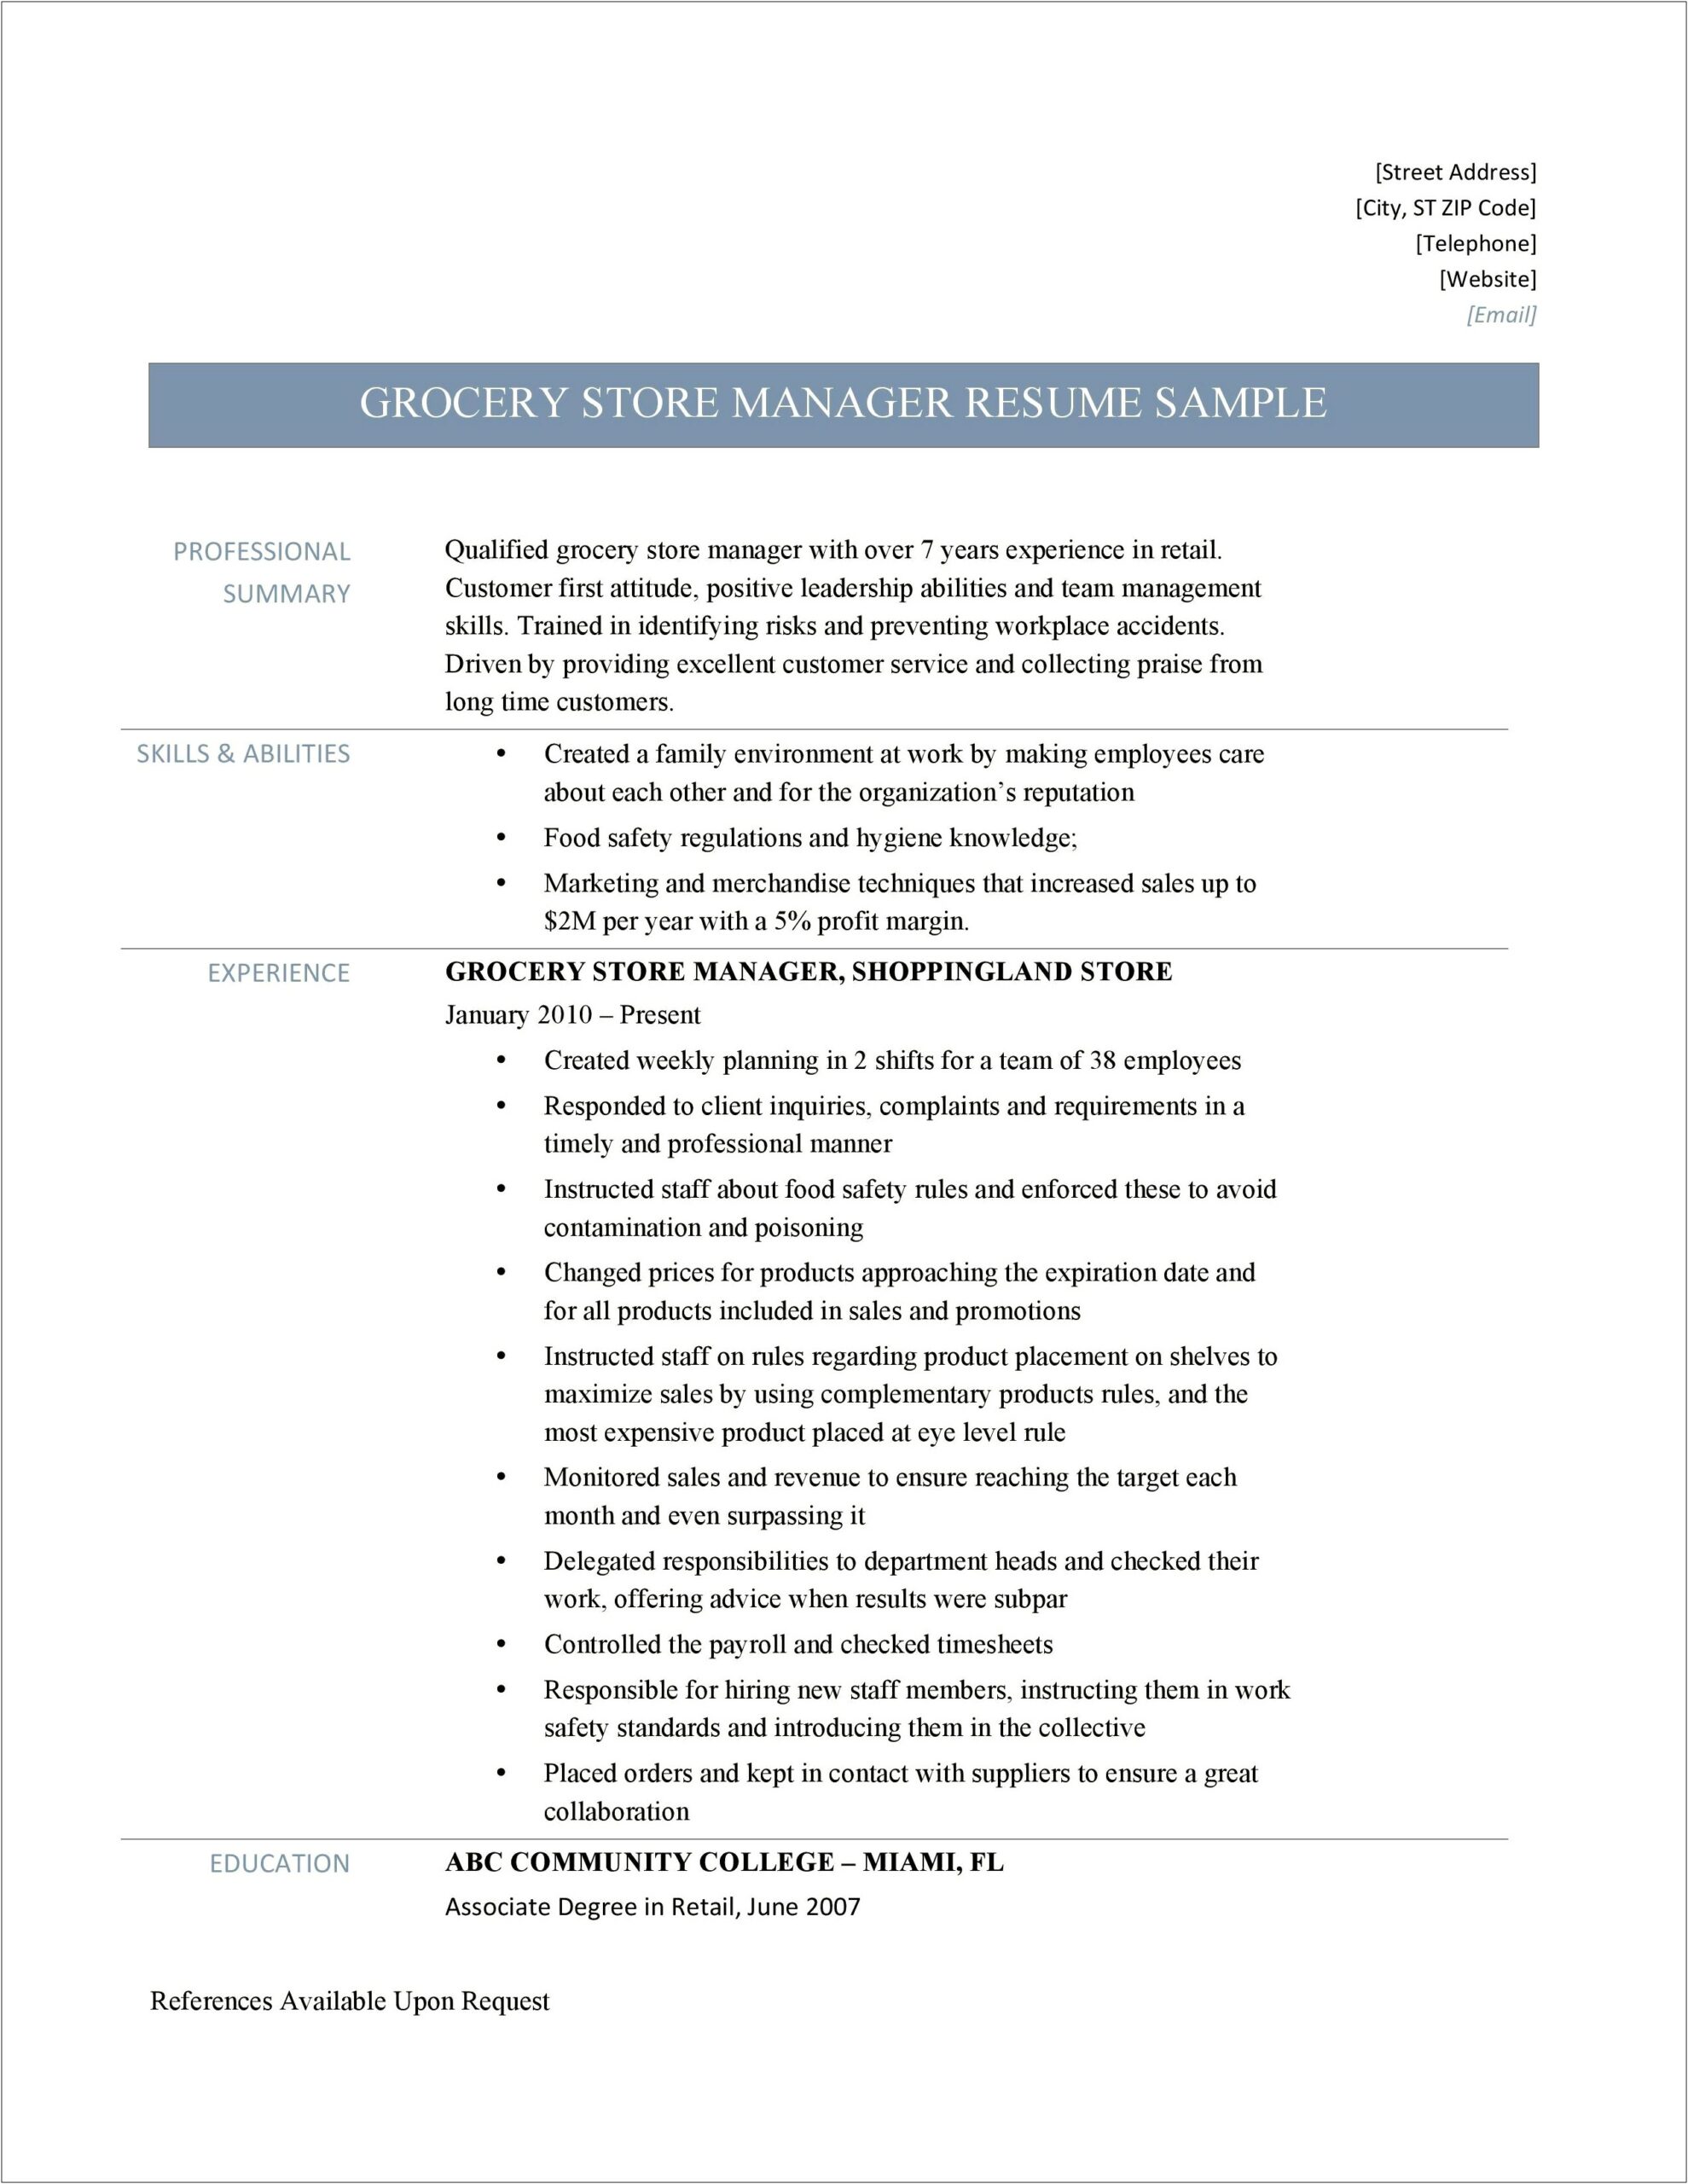 Customer Service Manager Grocery Store Resume